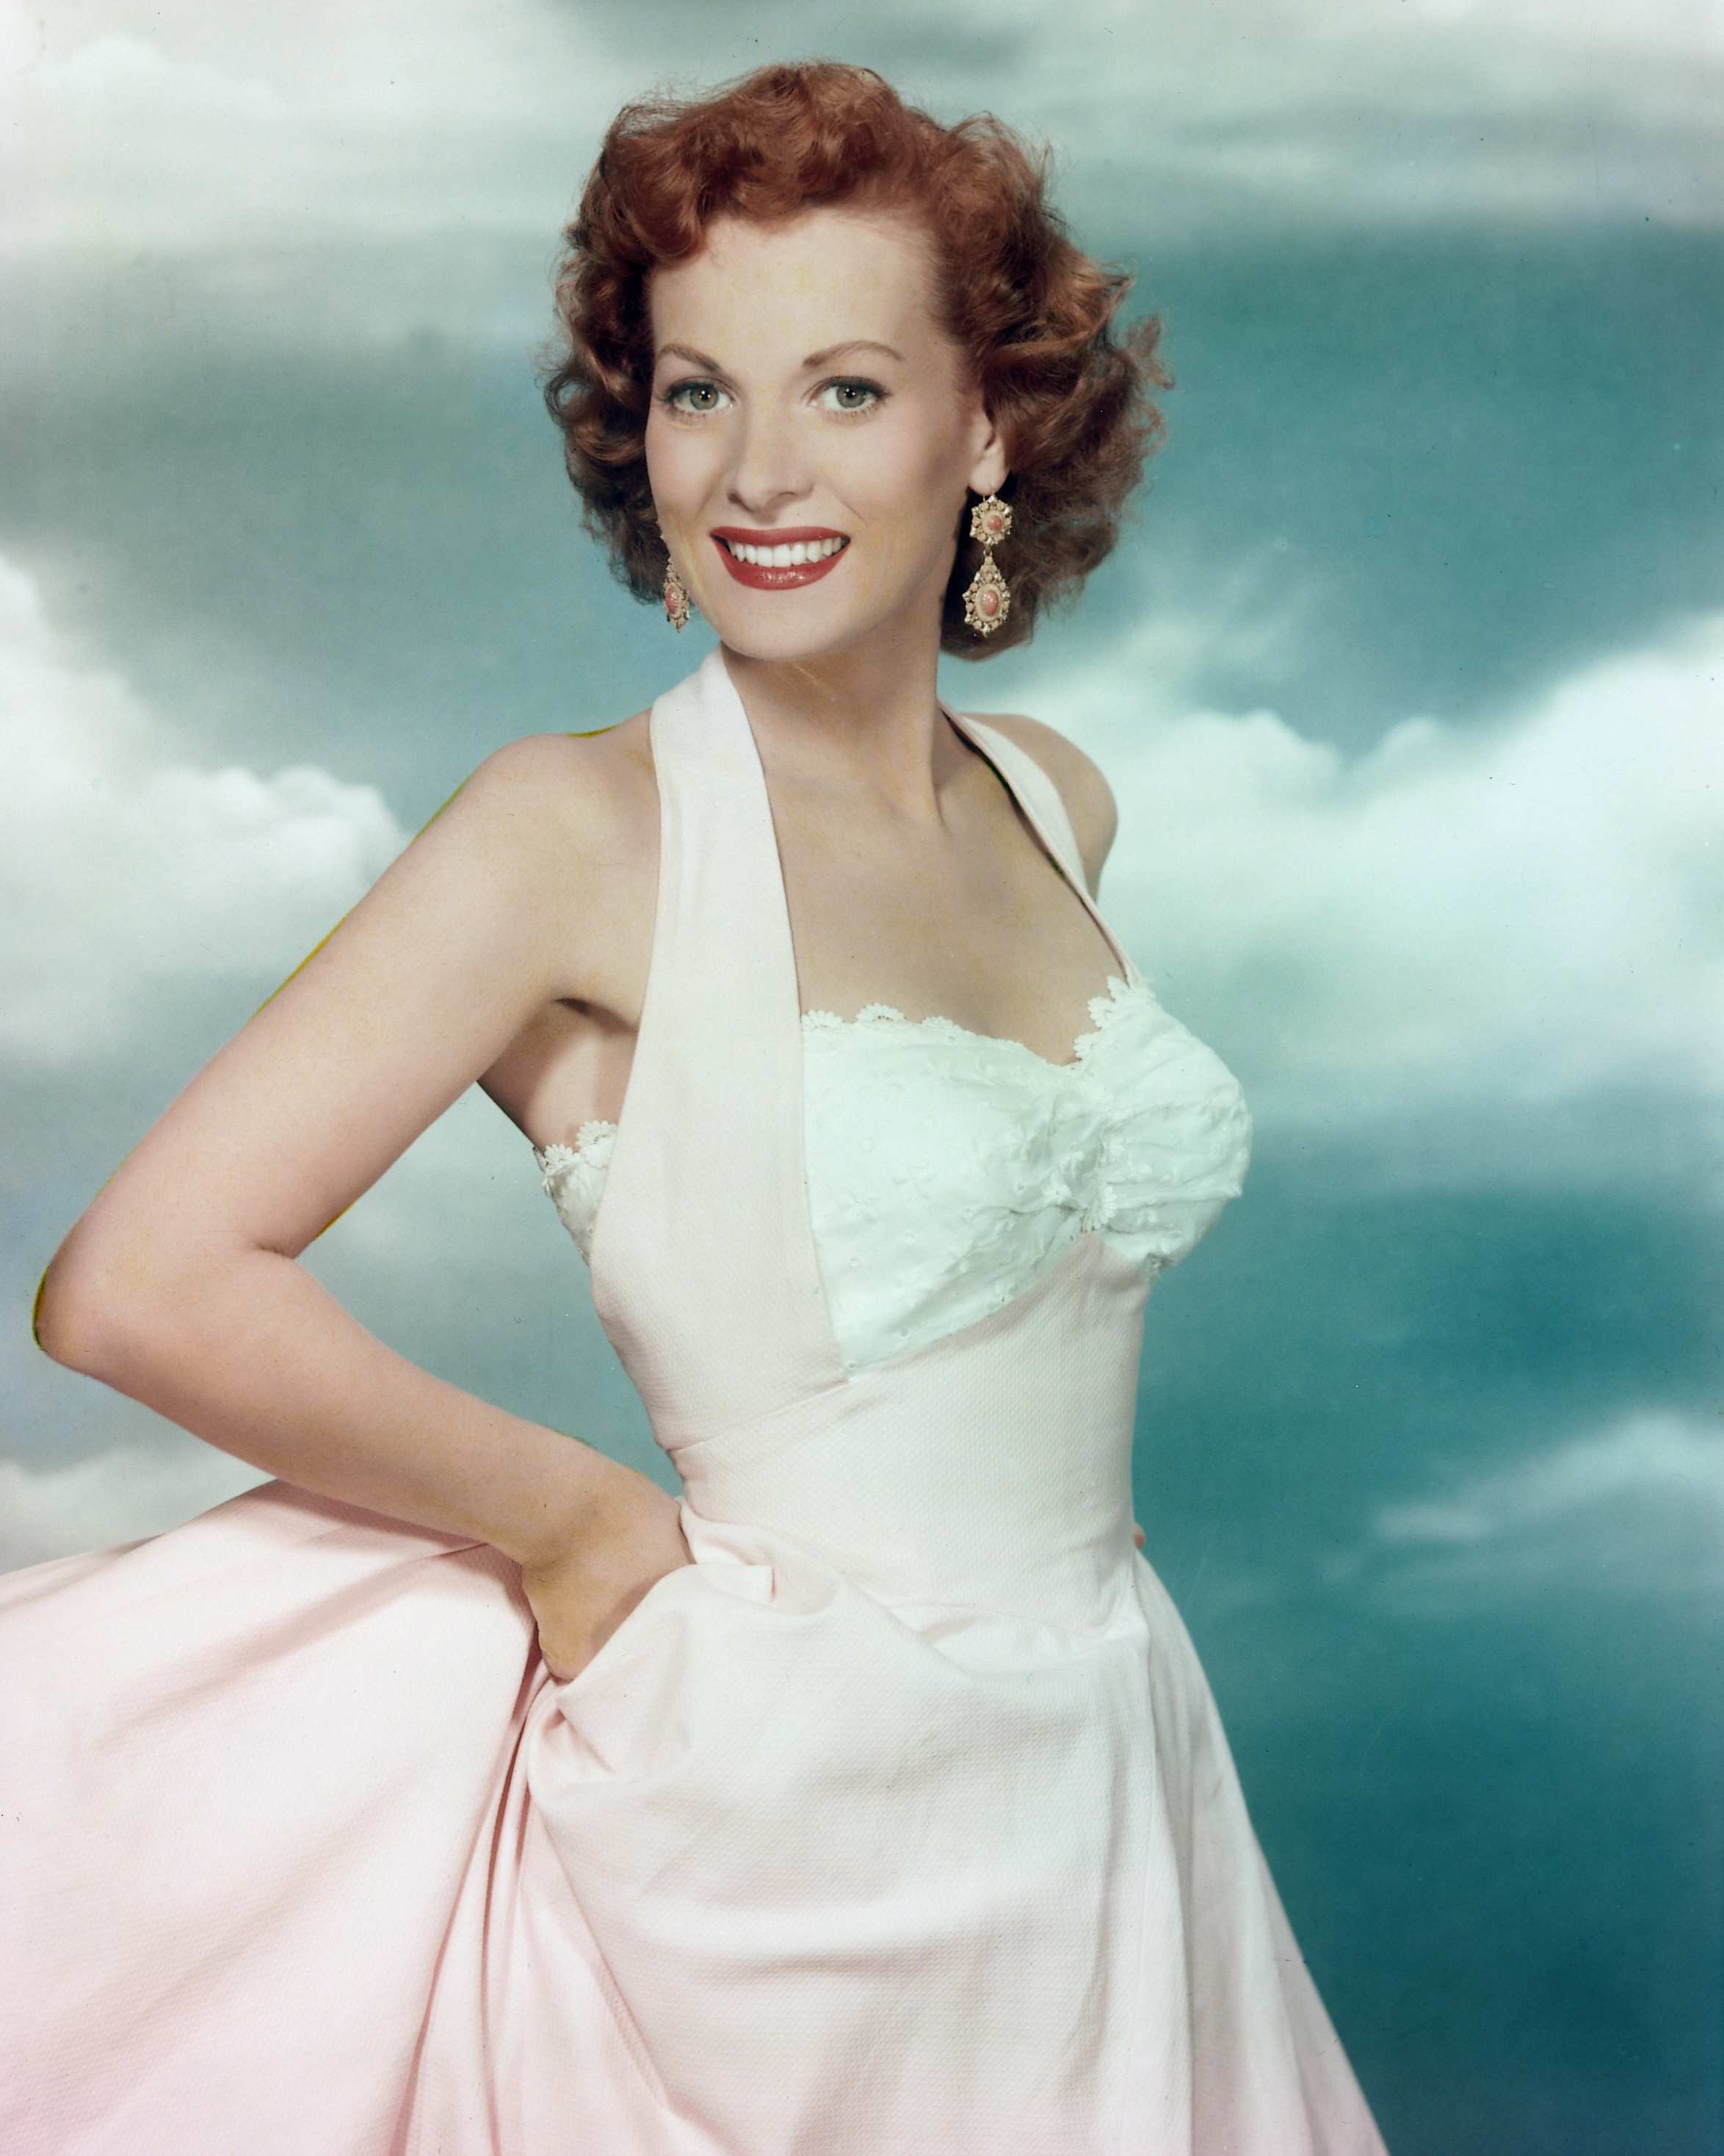 Maureen O'Hara pictured in the 1950's